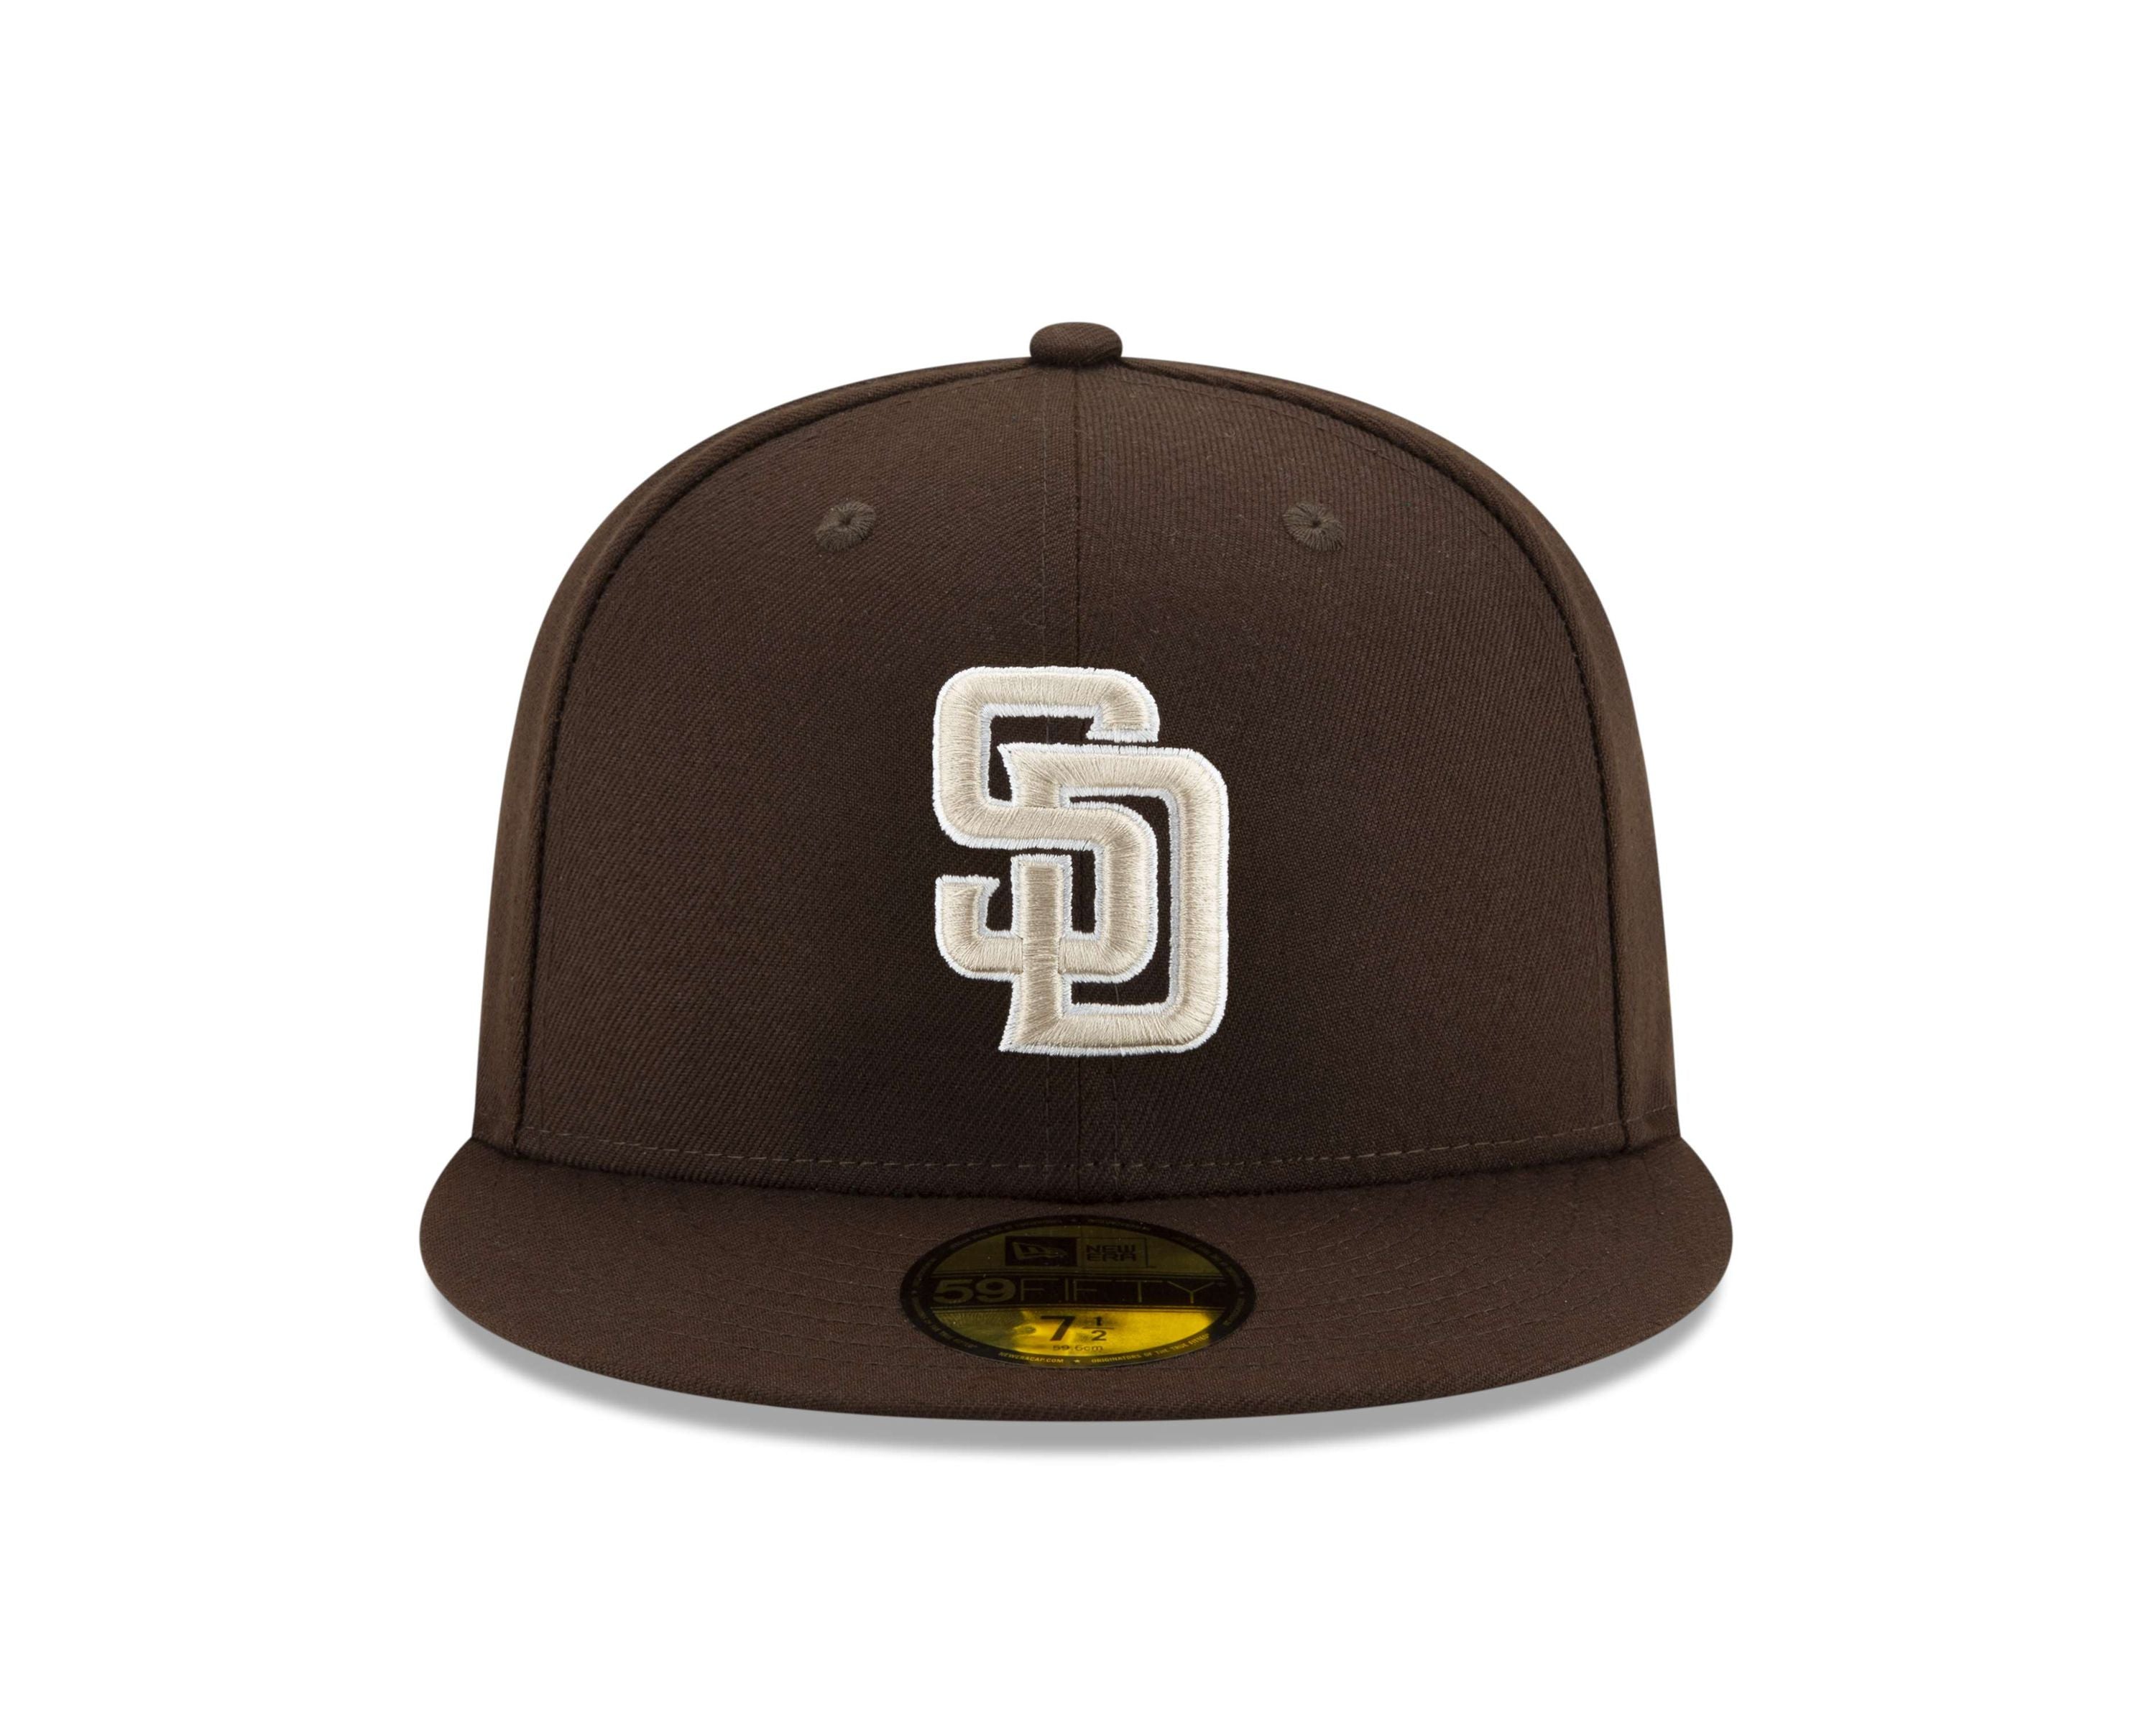 New Era - MLB San Diego Padres Authentic Collection Alternate Fitted Cap -